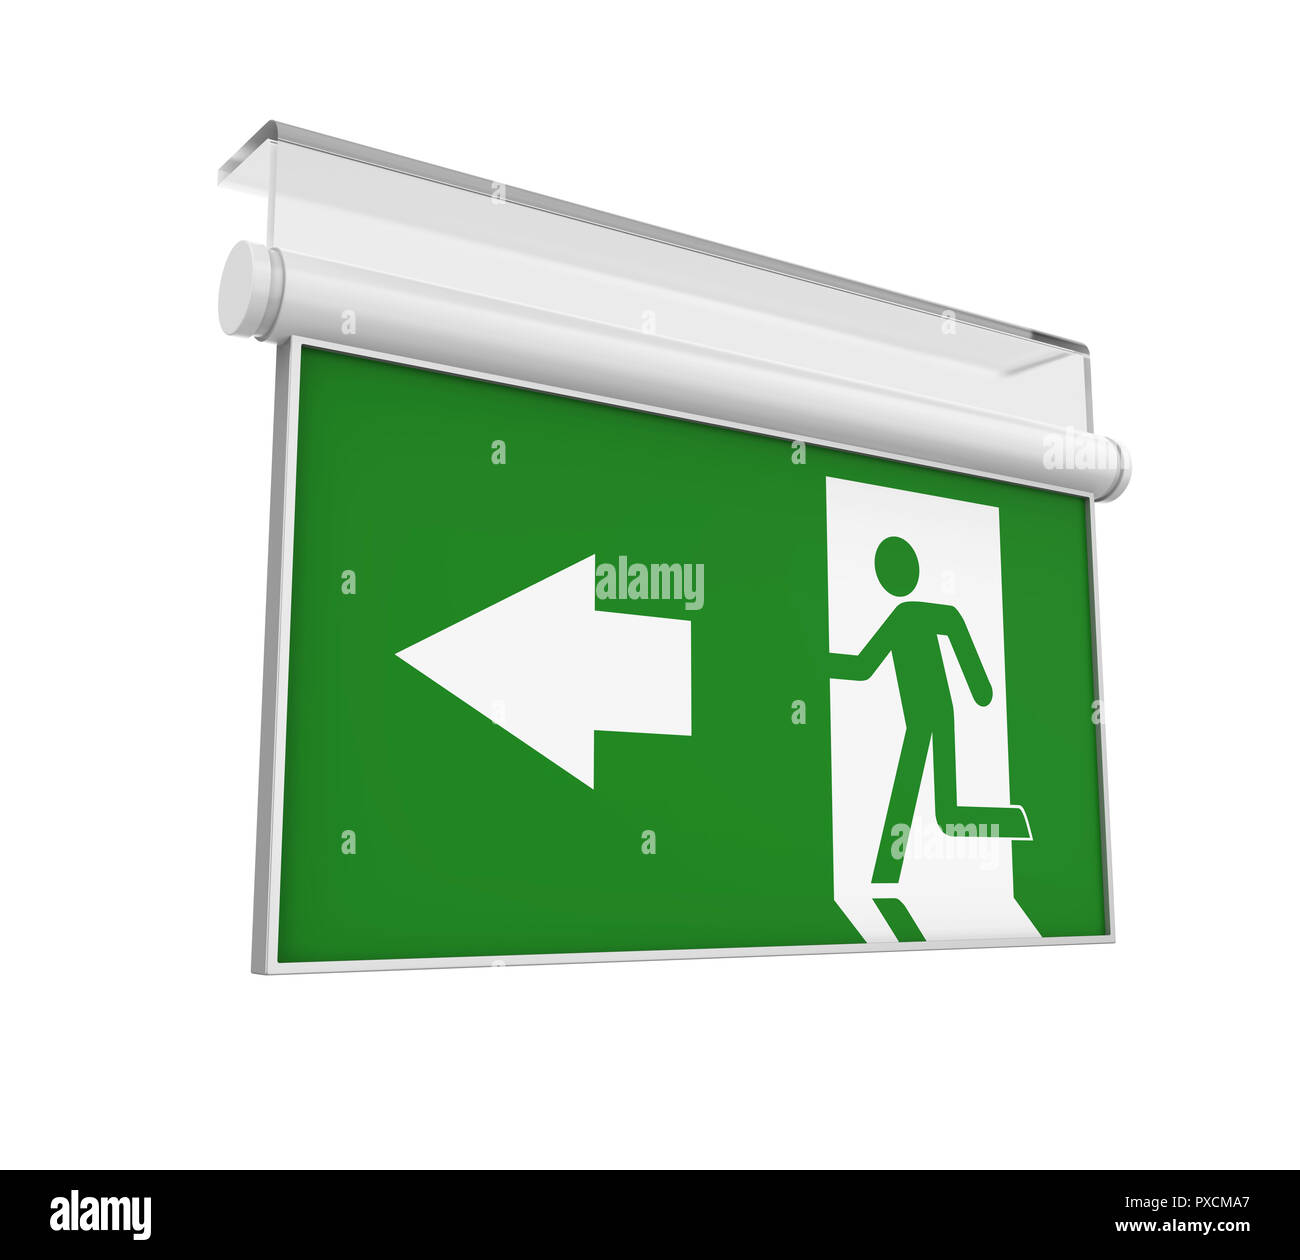 Emergency Exit Sign Isolated Stock Photo